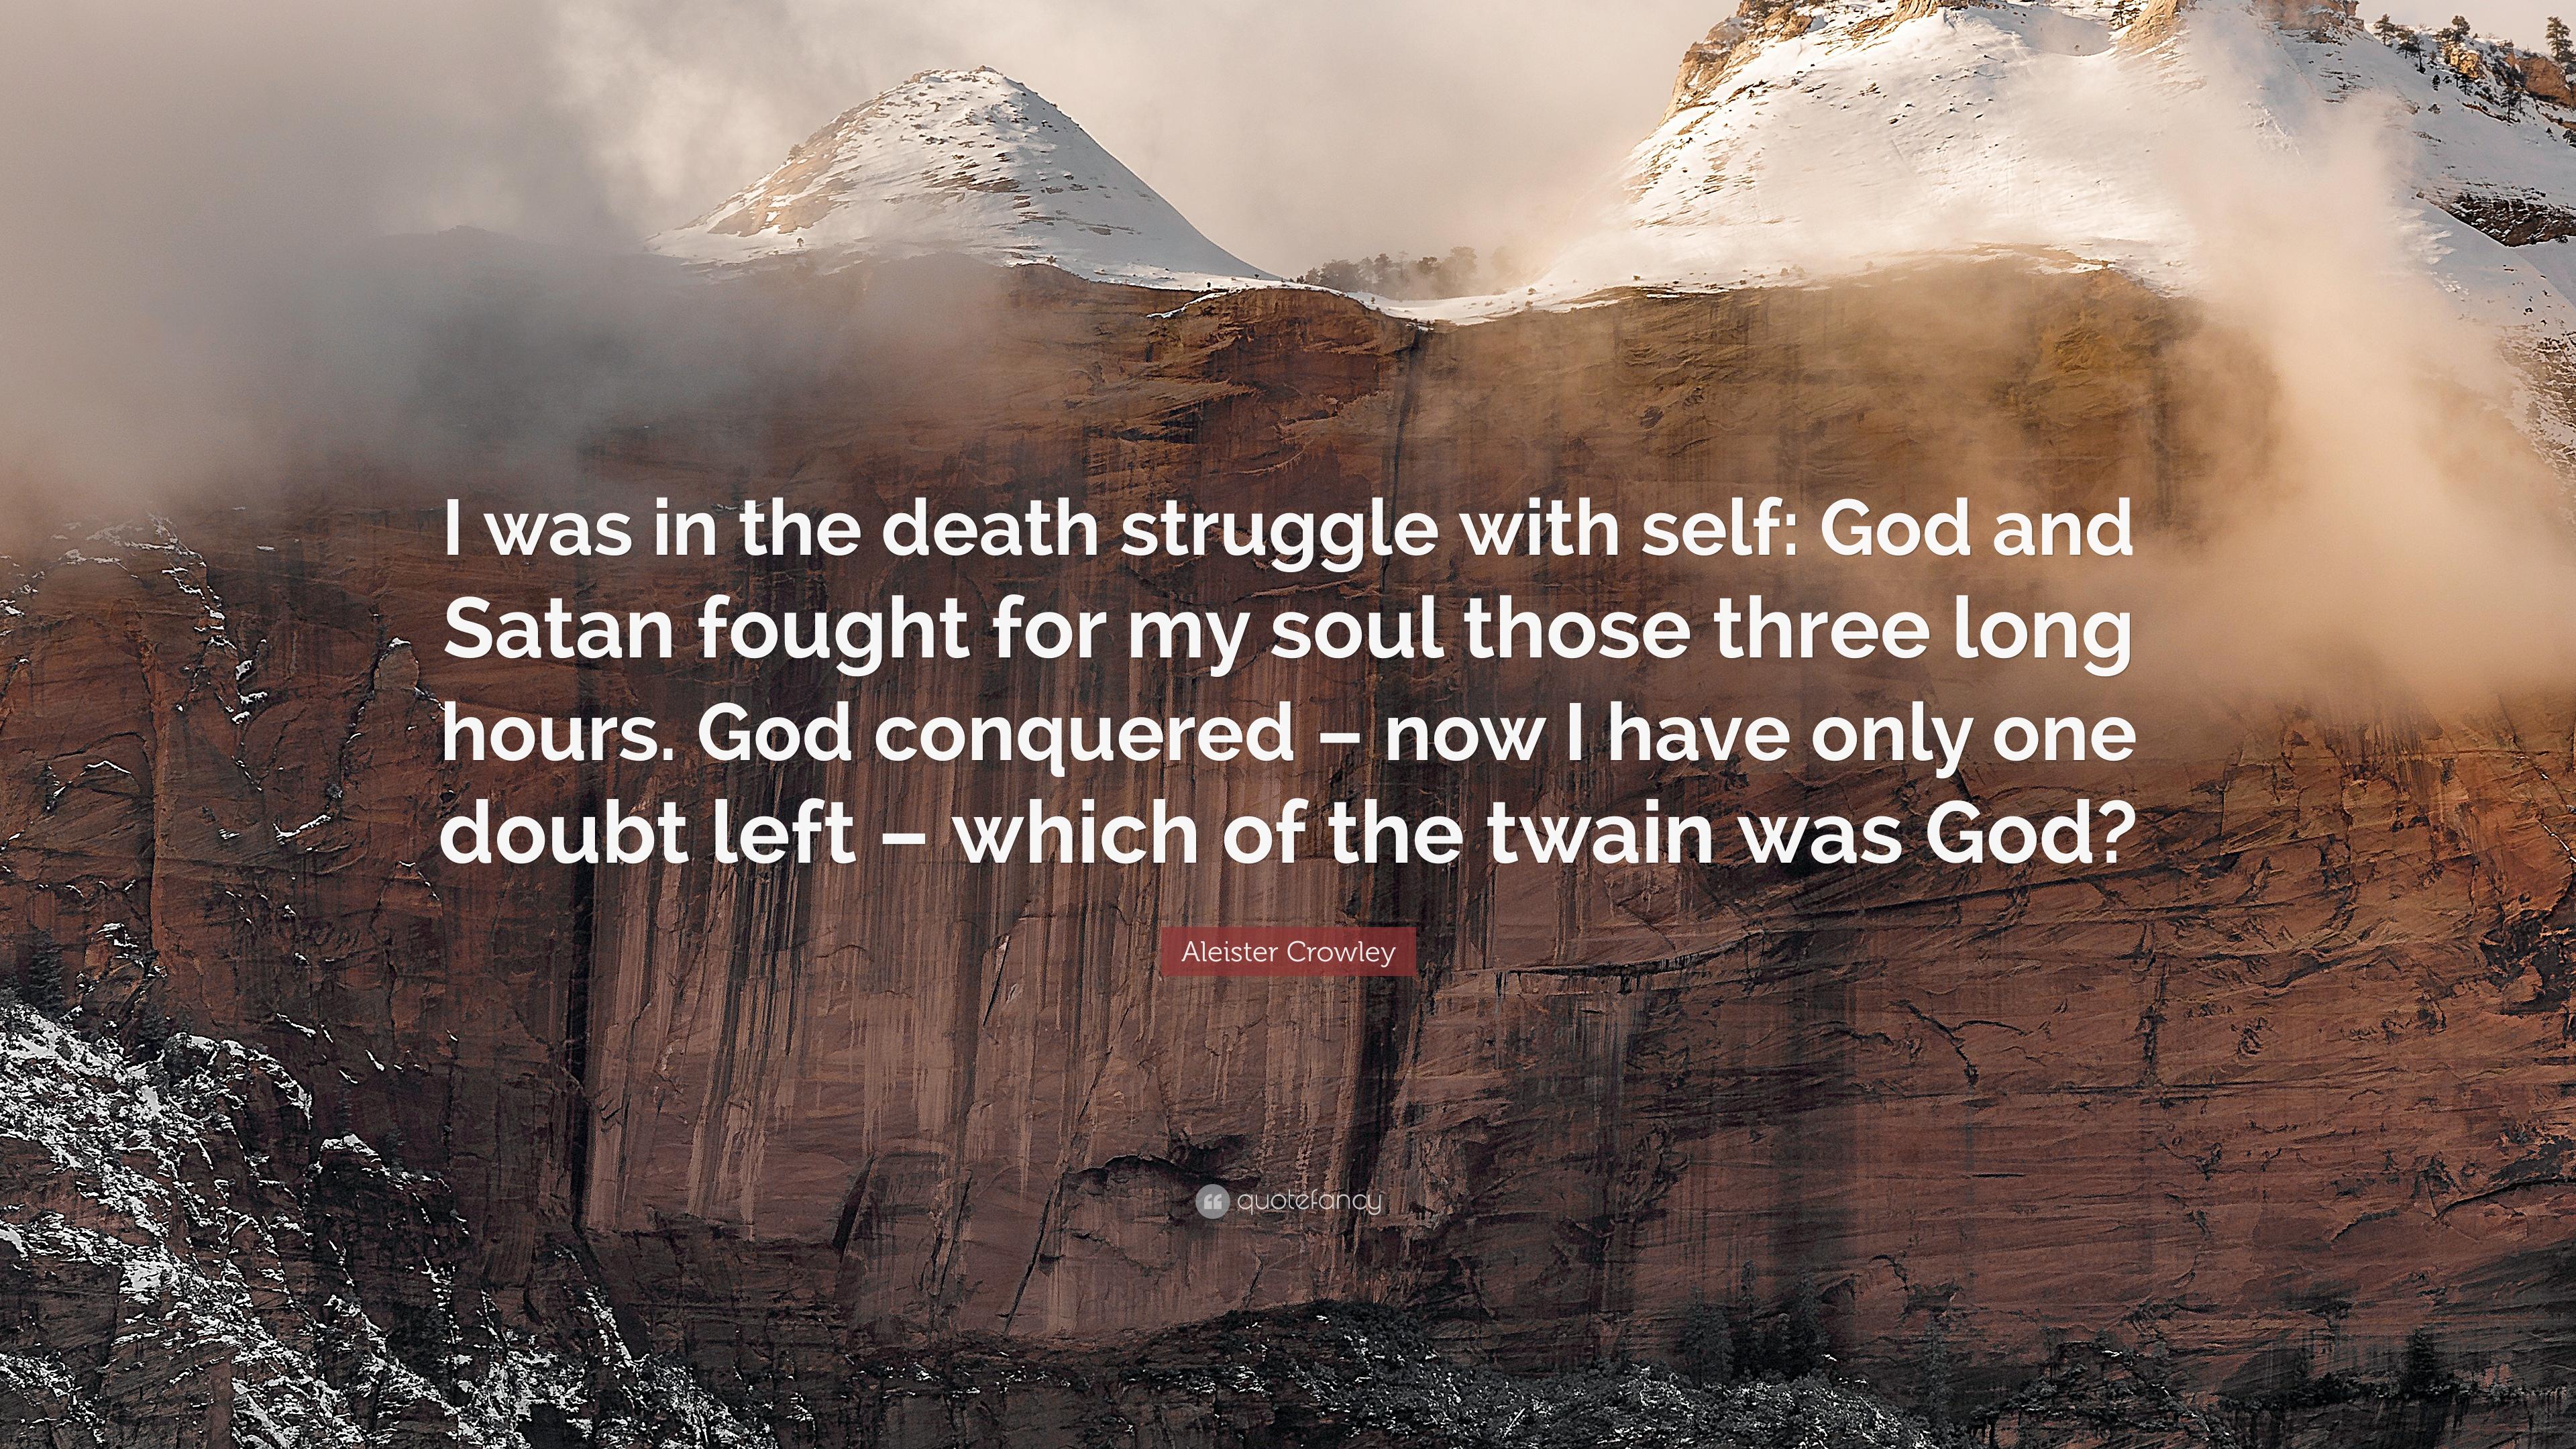 Aleister Crowley Quote: “I was in the death struggle with self: God